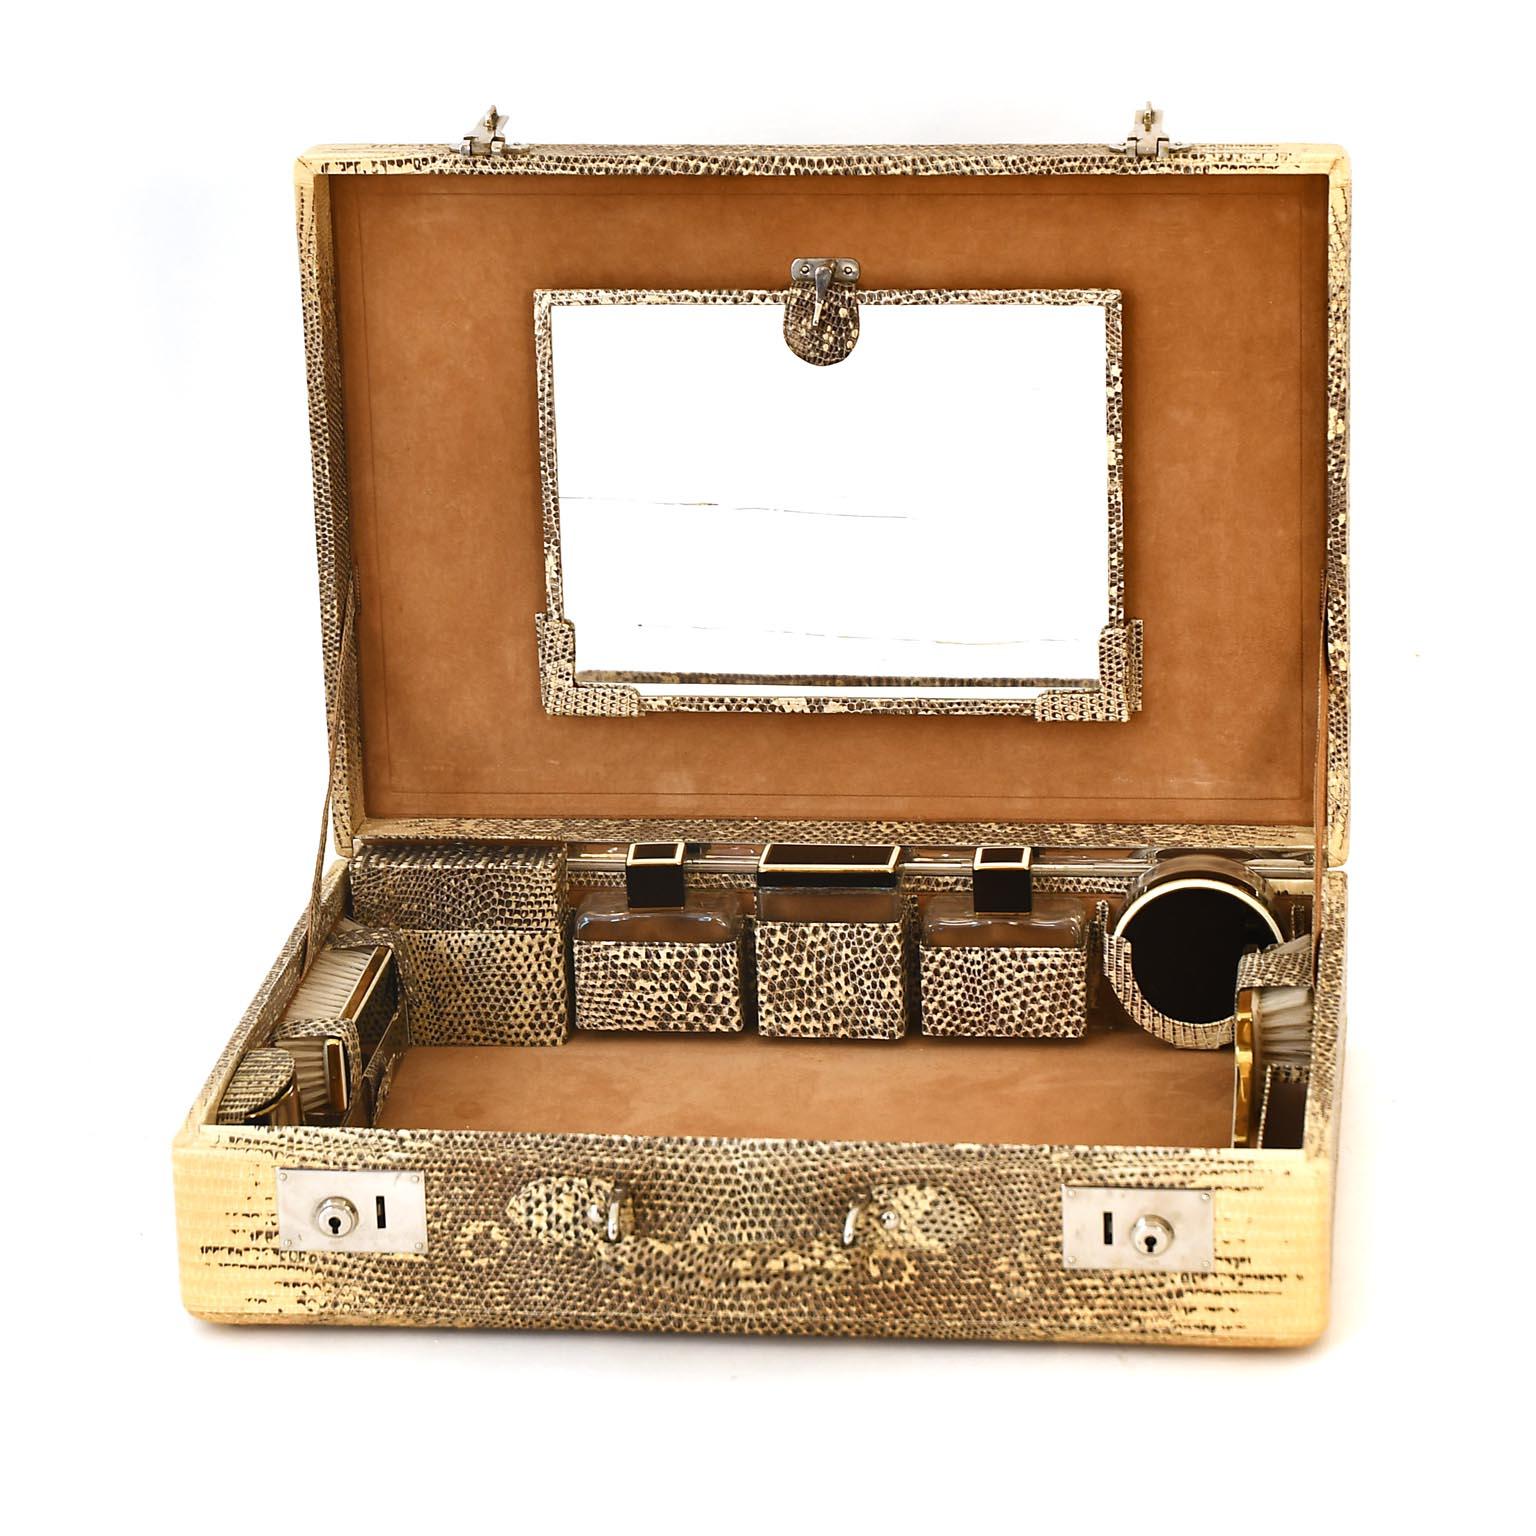 Necessaire De Toilette, Beauty Case, Traveling Case
Due to its royal past, Austria has had high-quality case manufacturers that continued to produce well into the 1970s. This beauty case is from the 1950s. It was made from the front cut of the